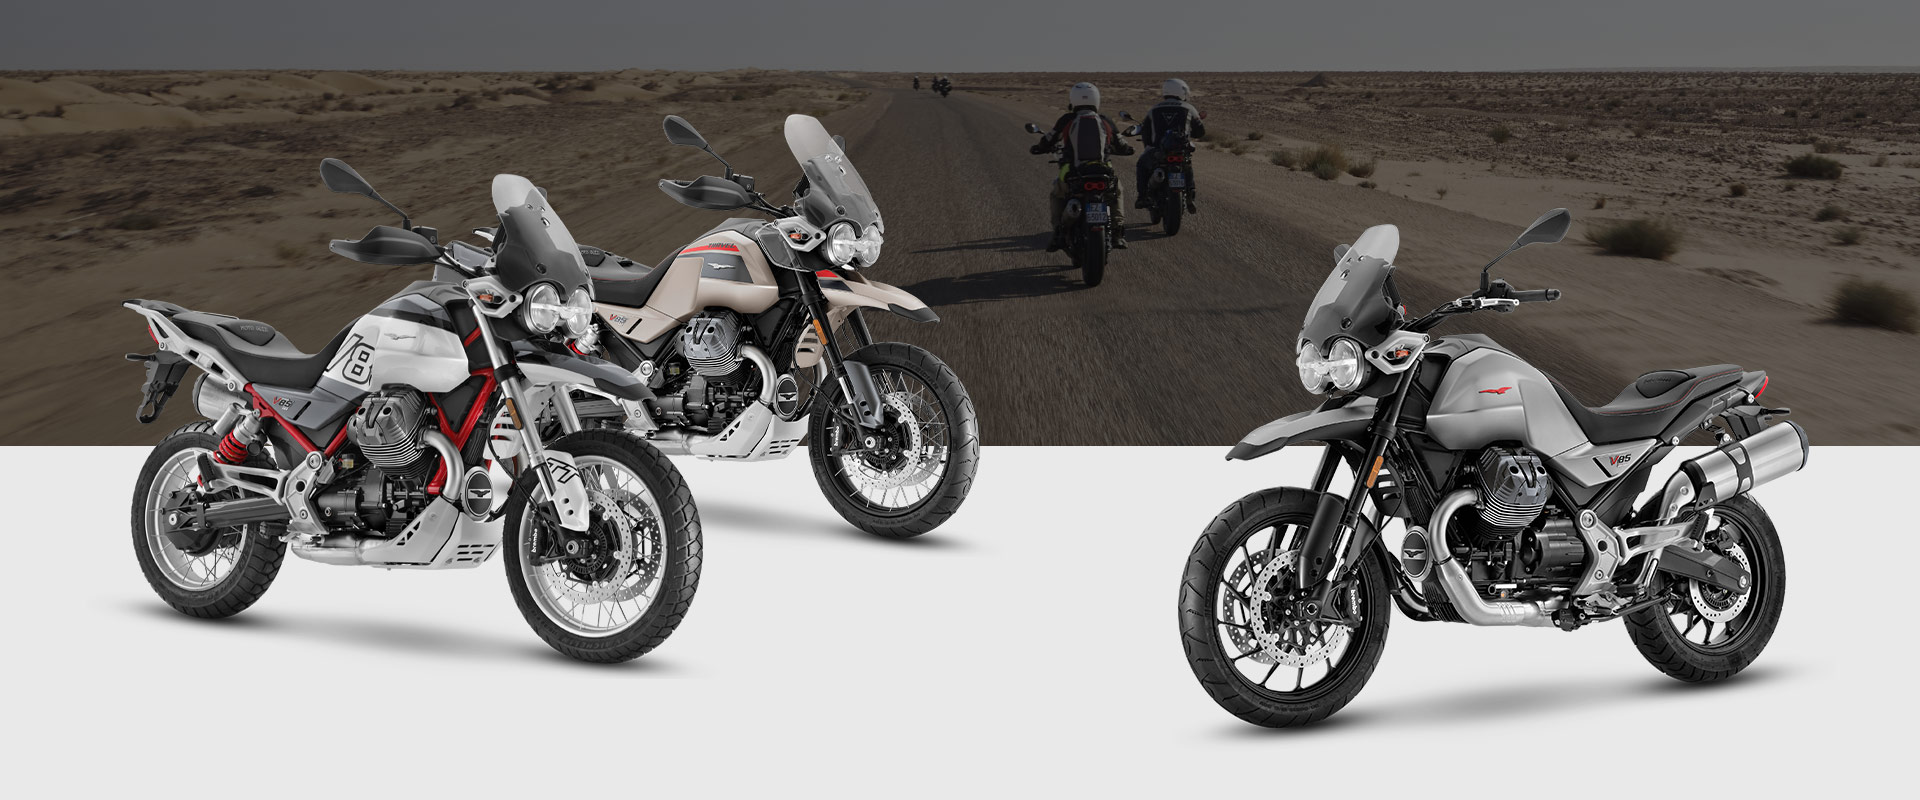 Equipement moto – One World to Discover